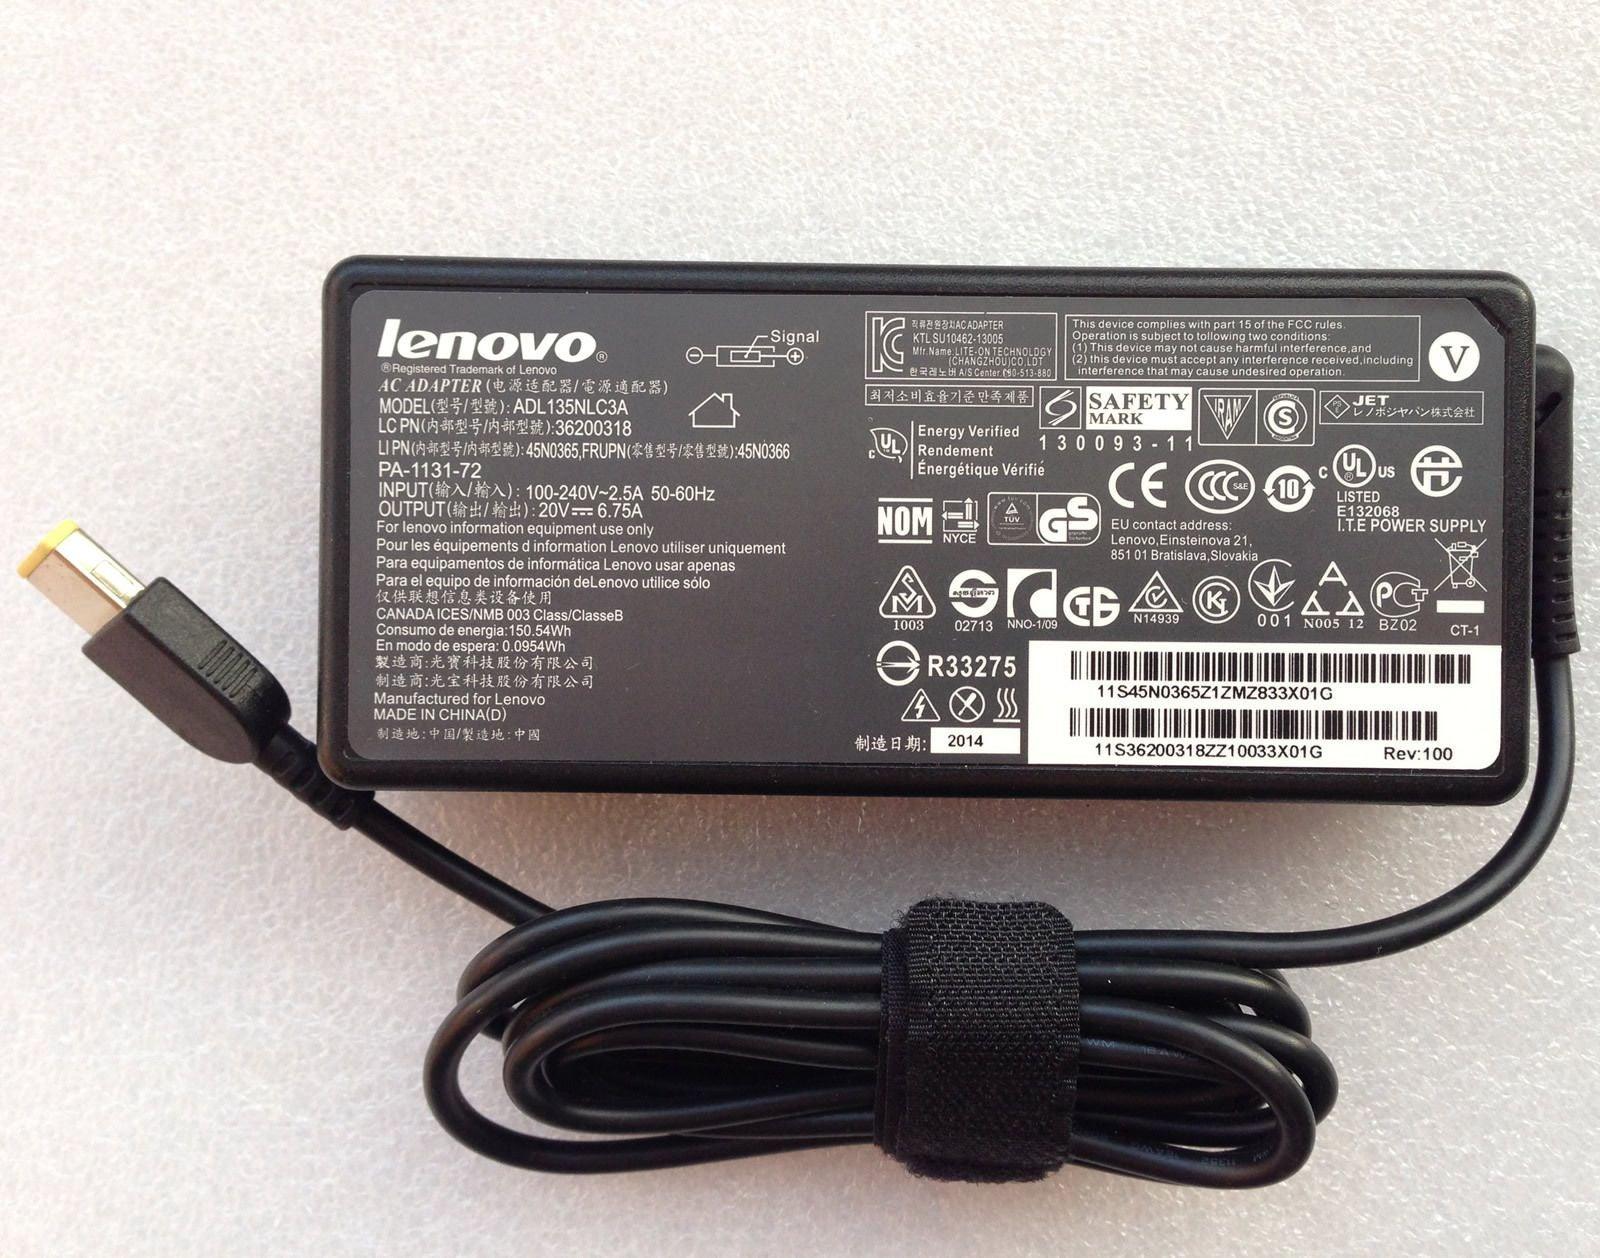 Lenovo 20V 6.75A 135W Yellow USB Type (inside pin) Original AC Power Adapter or Charger For Lenovo laptop ADL135NDC2A 36200315